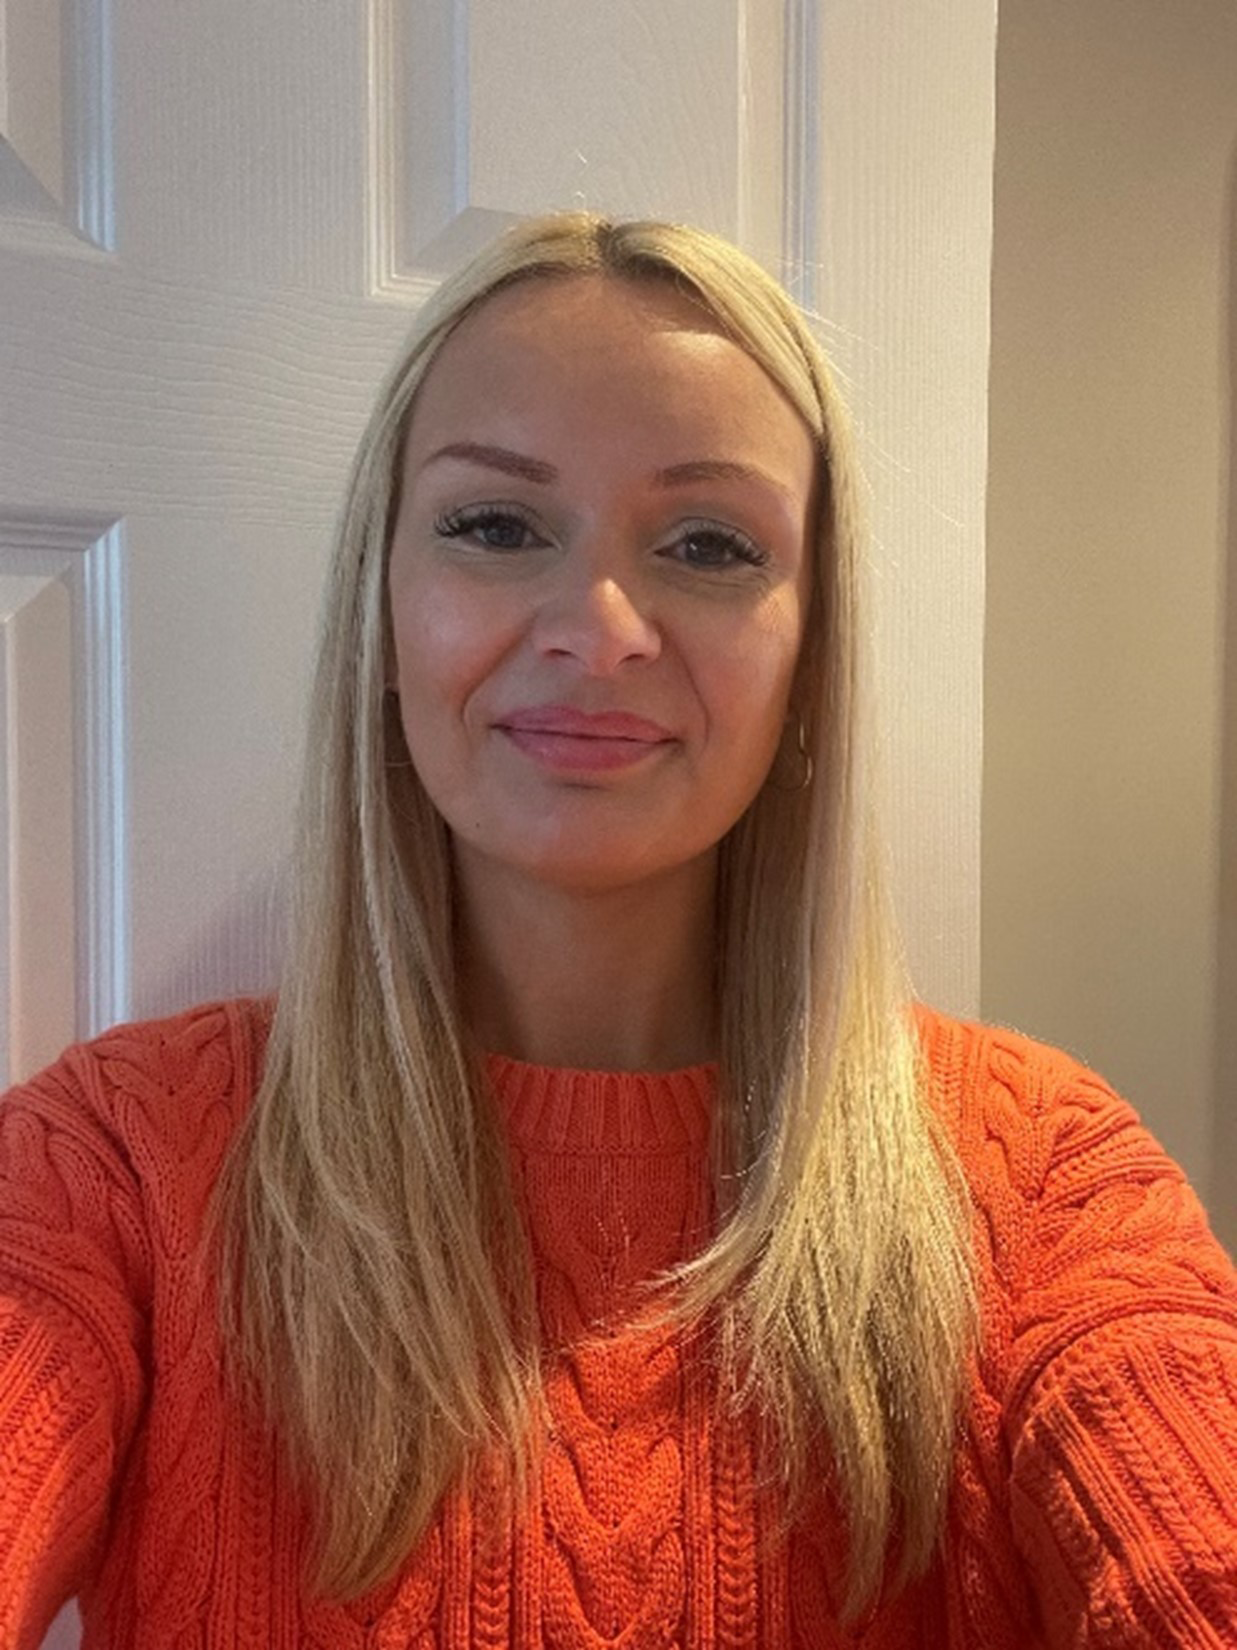 A photo of a blonde woman smiling at the camera. Her hair is down and rests below her shoulders. She is stood in front of a white door and wearing an orange jumper